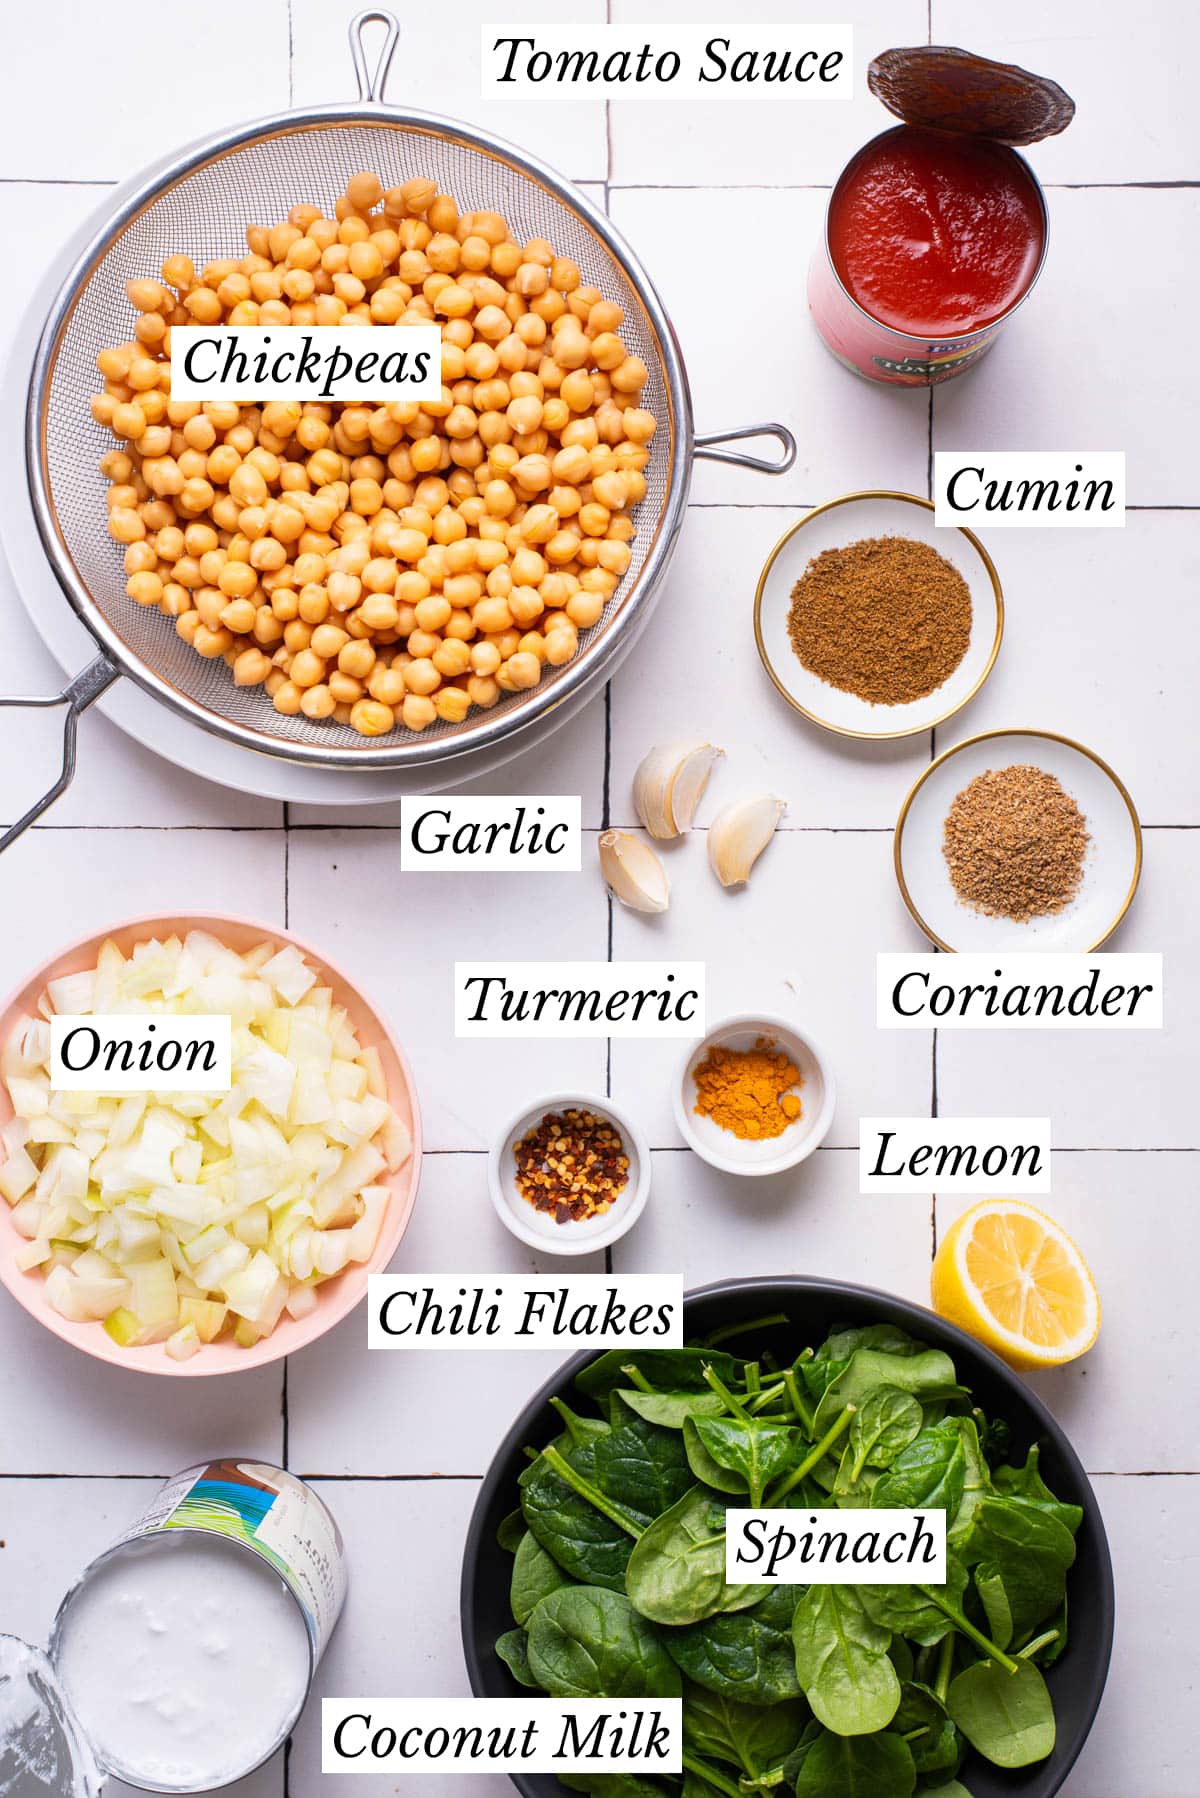 Ingredients gathered to make Indian-inspired vegan chickpea spinach curry.